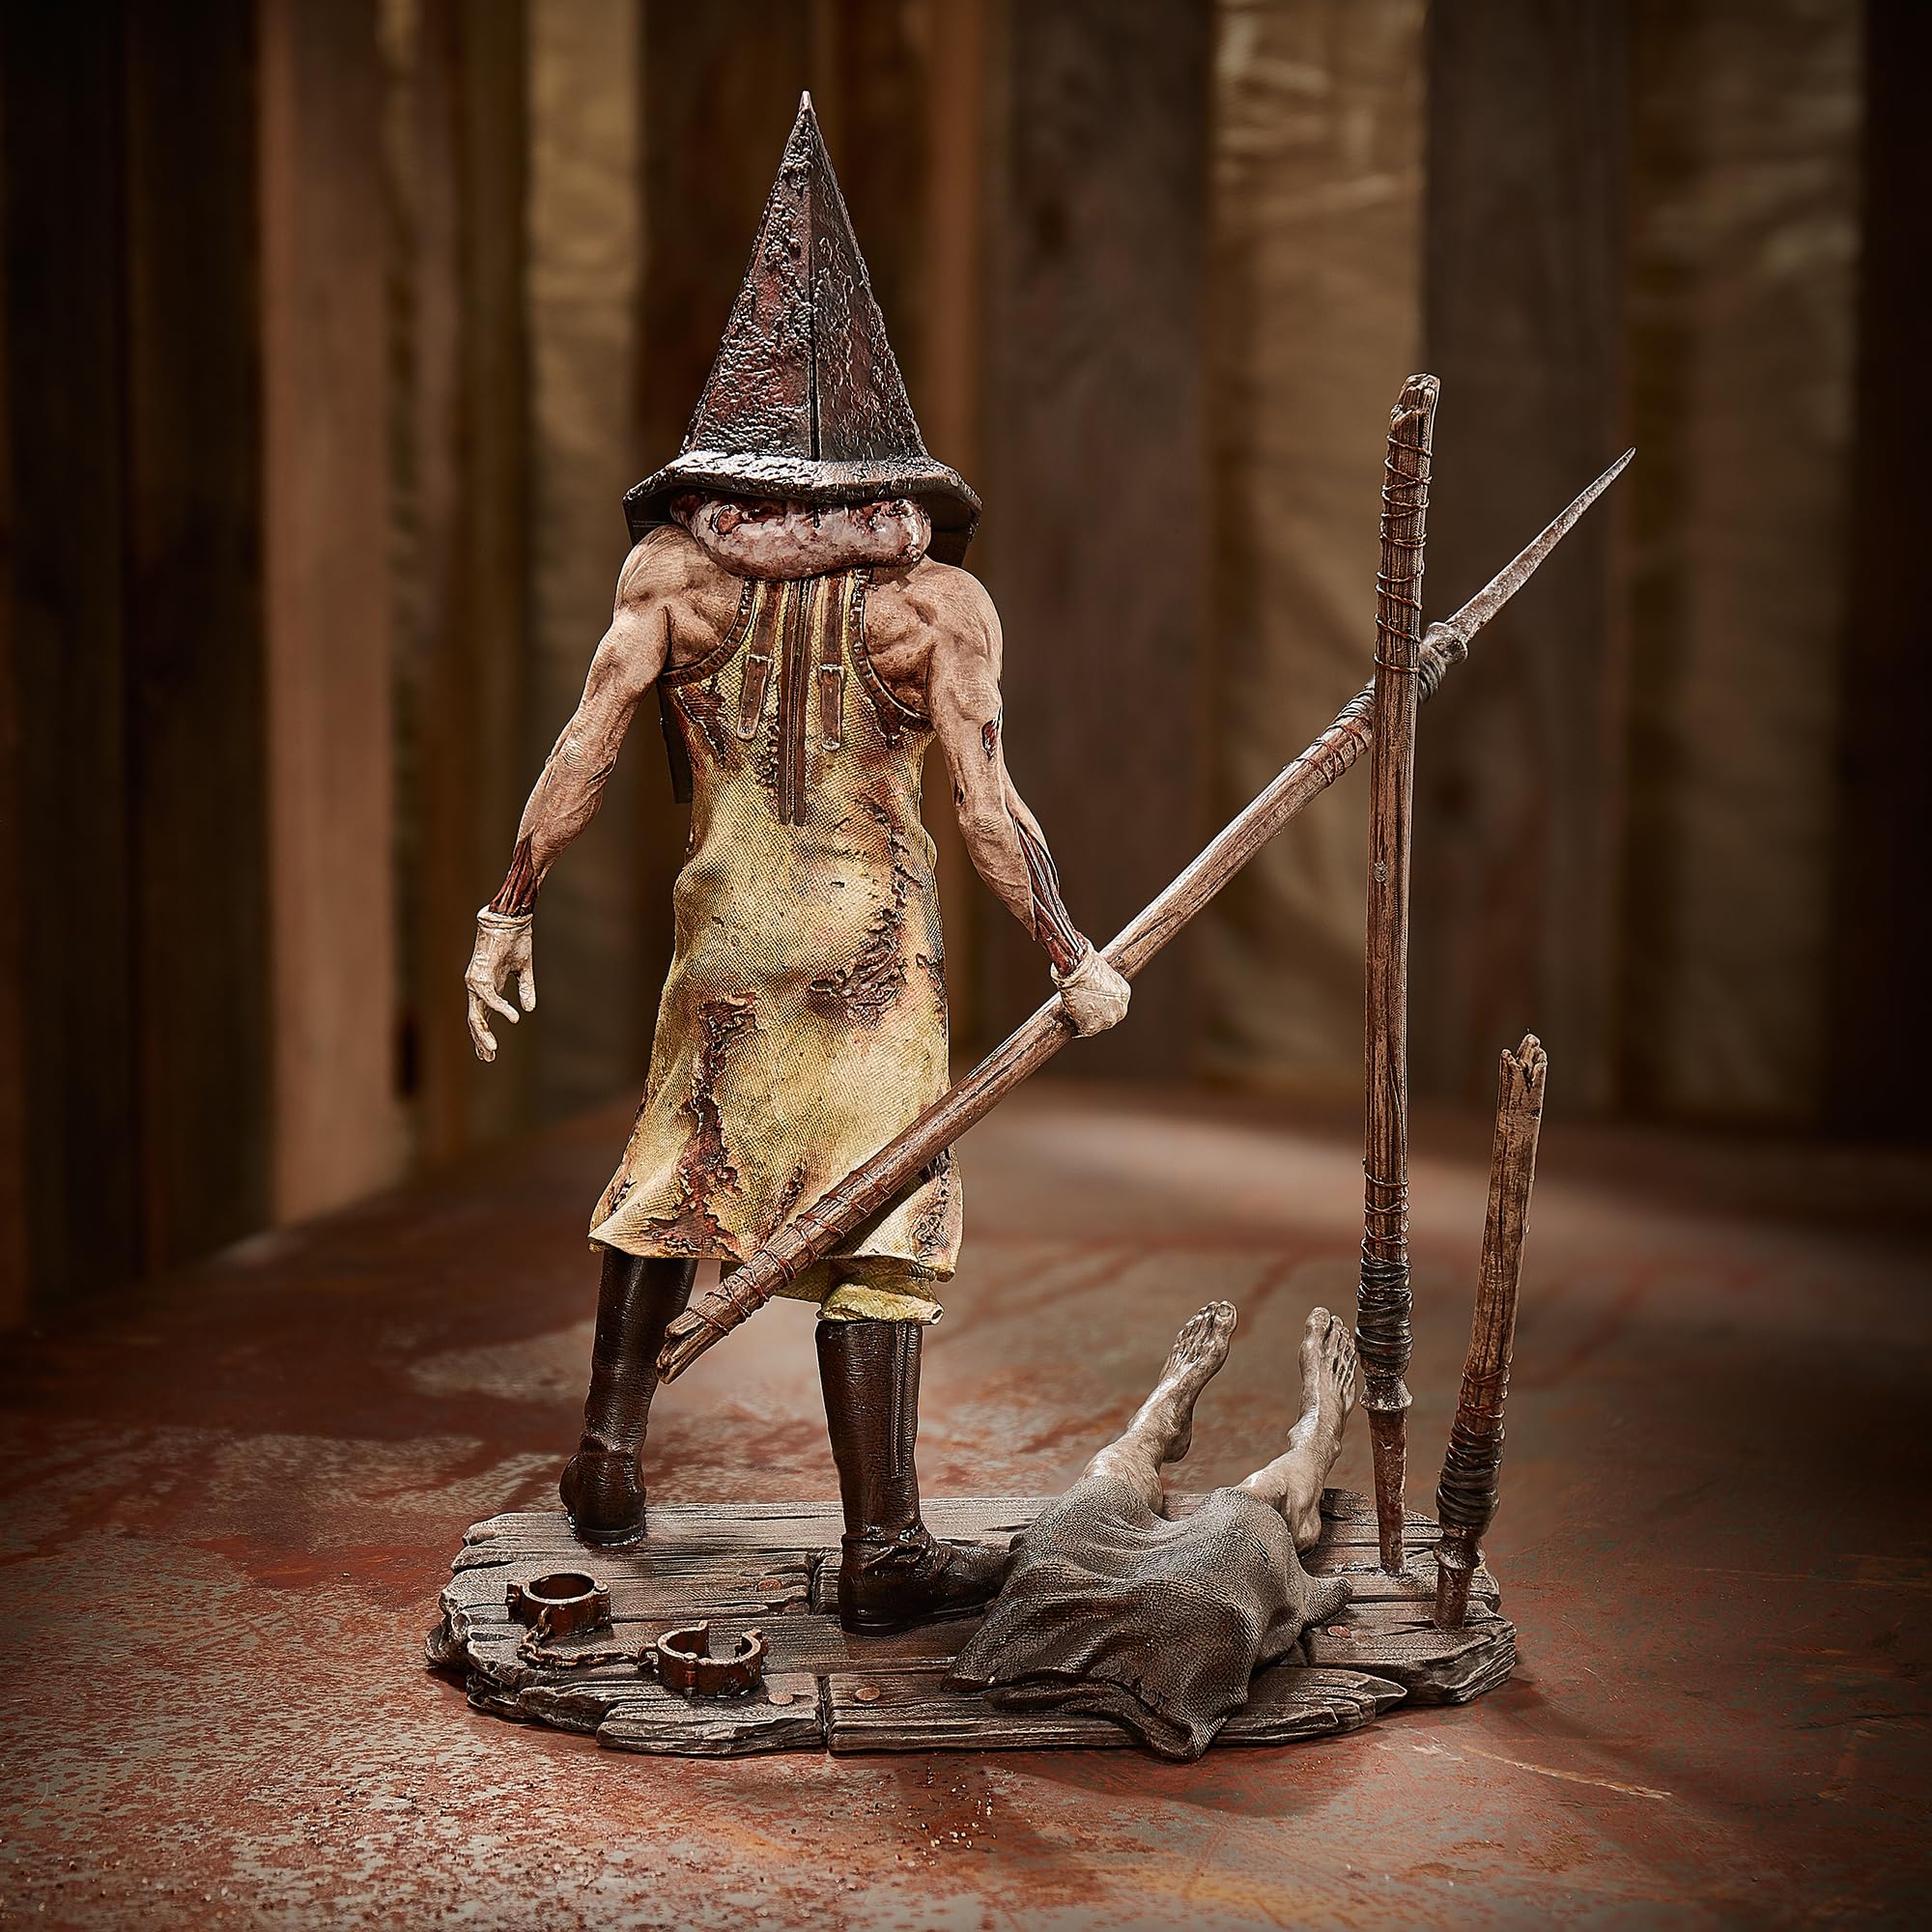 Numskull Silent Hill 2 Red Pyramid Thing Figure 11.6″ (29.5cm) Collectible Replica Statue - Official Silent Hill Merchandise - Limited Edition